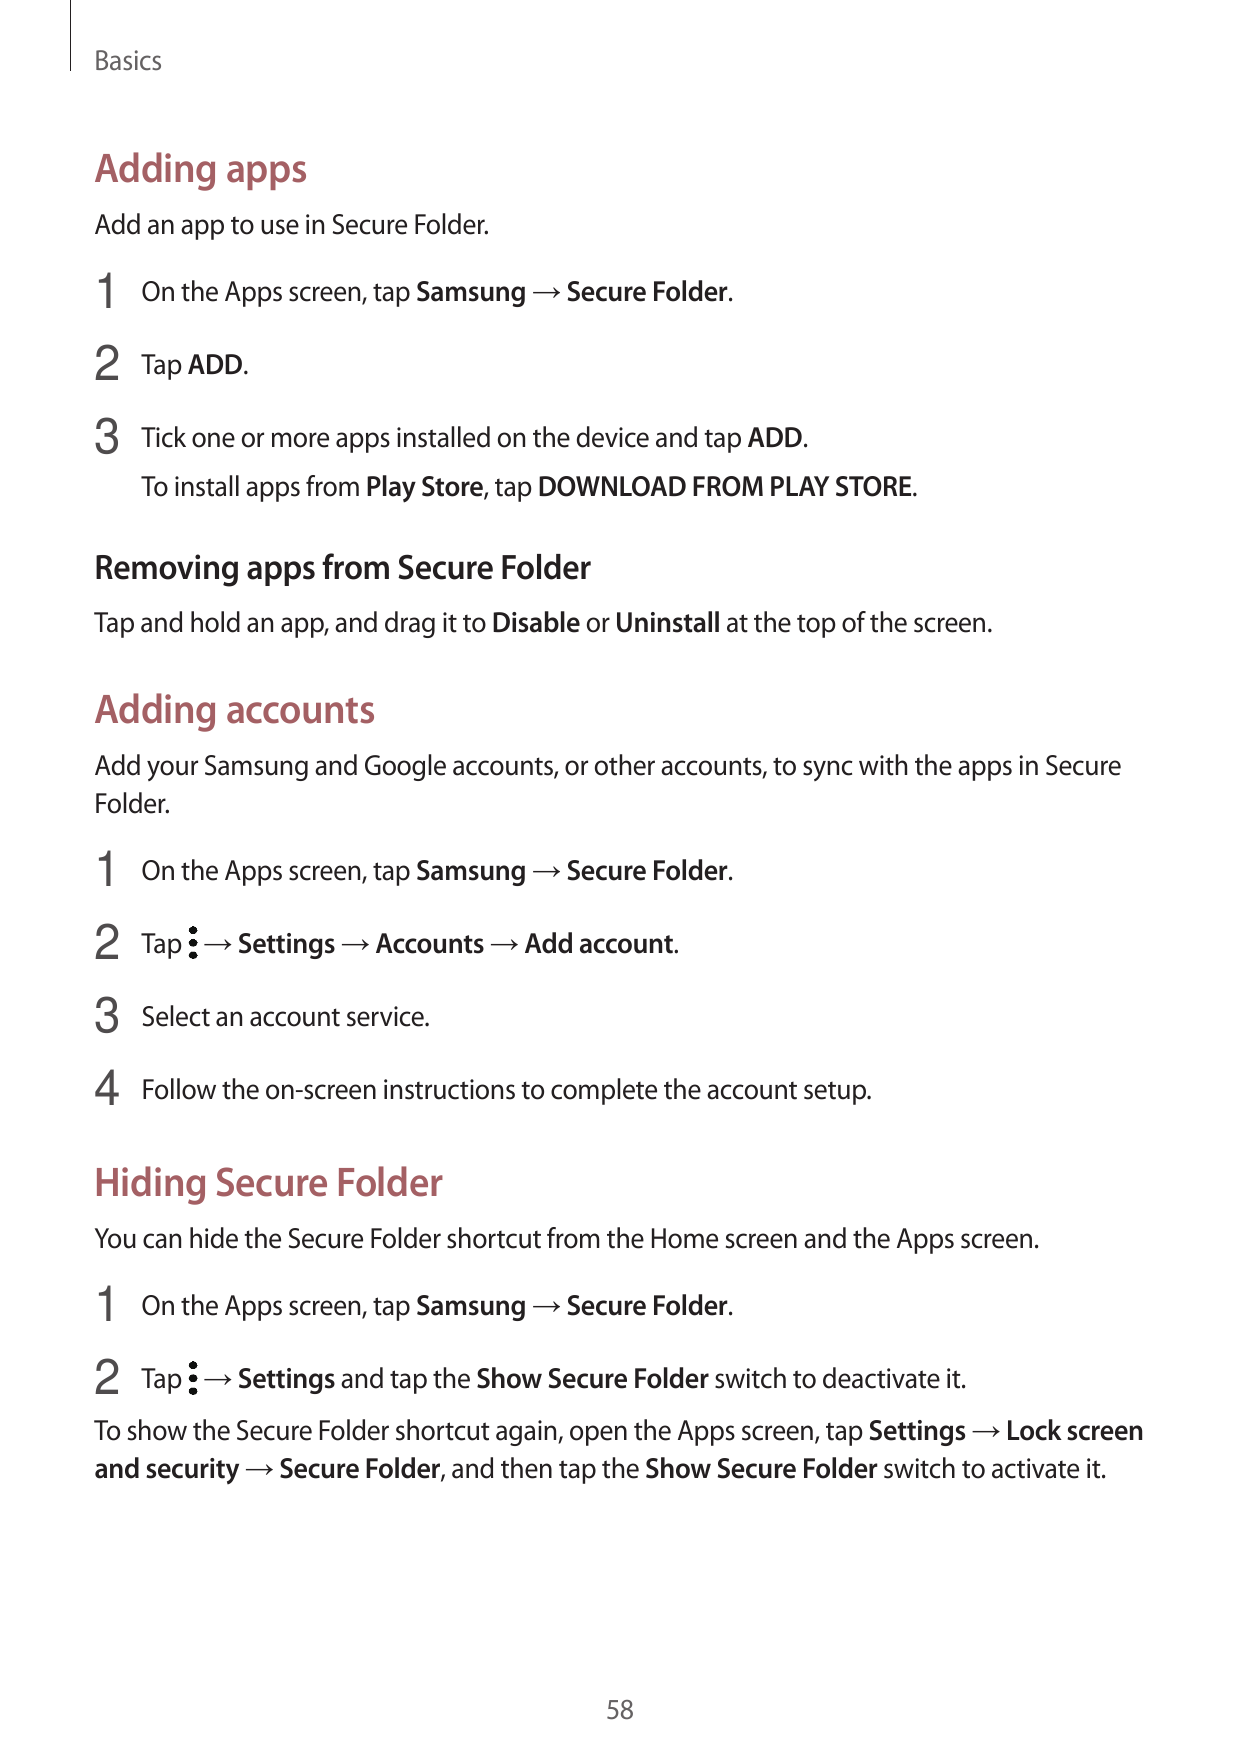 BasicsAdding appsAdd an app to use in Secure Folder.1 On the Apps screen, tap Samsung → Secure Folder.2 Tap ADD.3 Tick one or mo